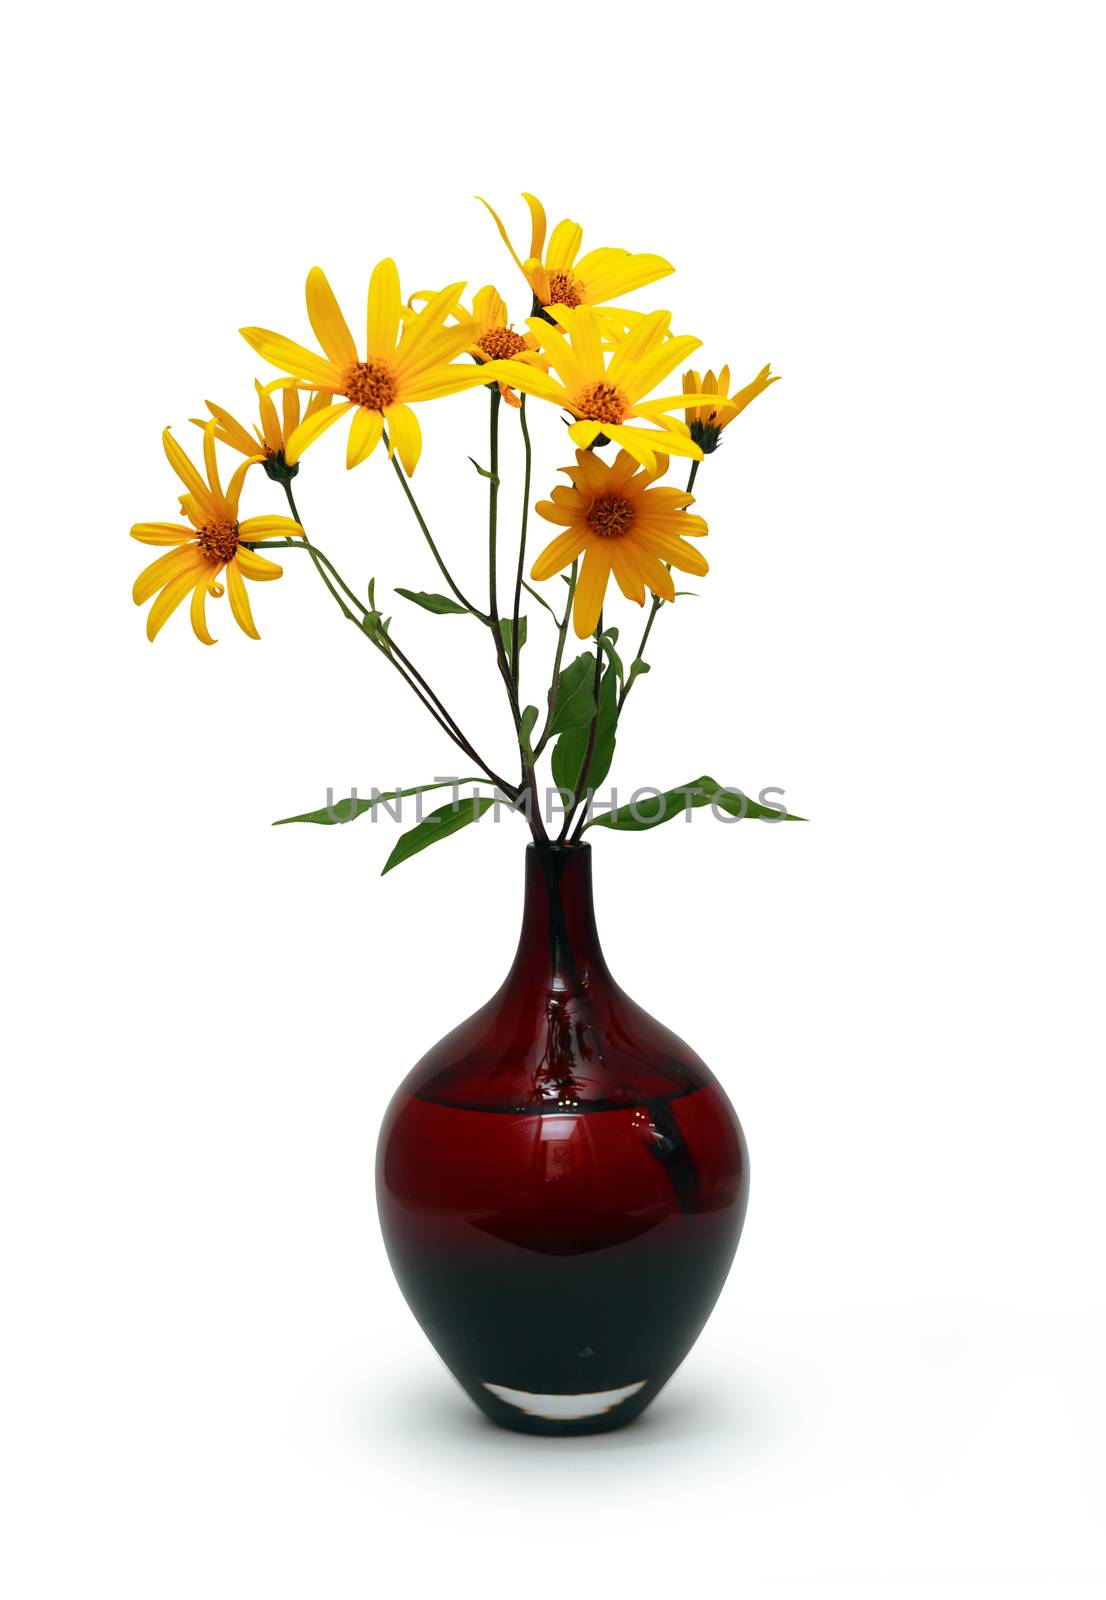 Nice yellow wildflowers in glass vase isolated on white background